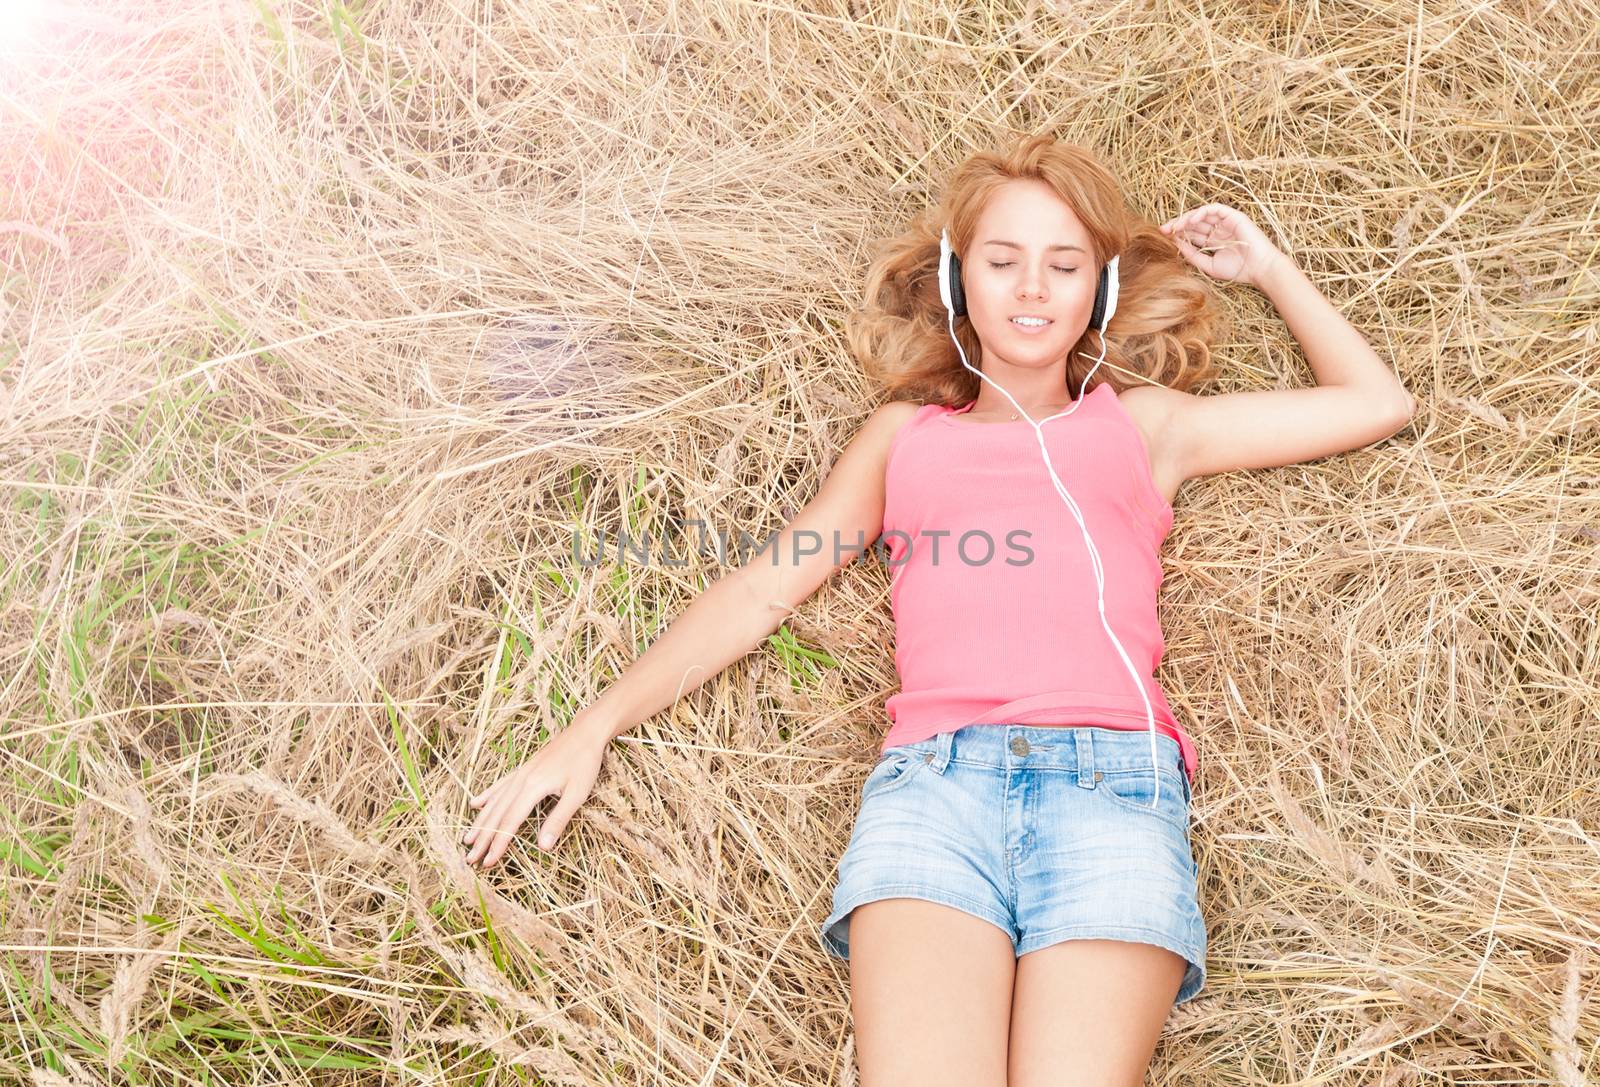 Beautiful girl relaxing in headphones outdoors. Pretty smiling woman with closed eyes listening to music lying on hay in field. Harmony of human and nature. Countryside.